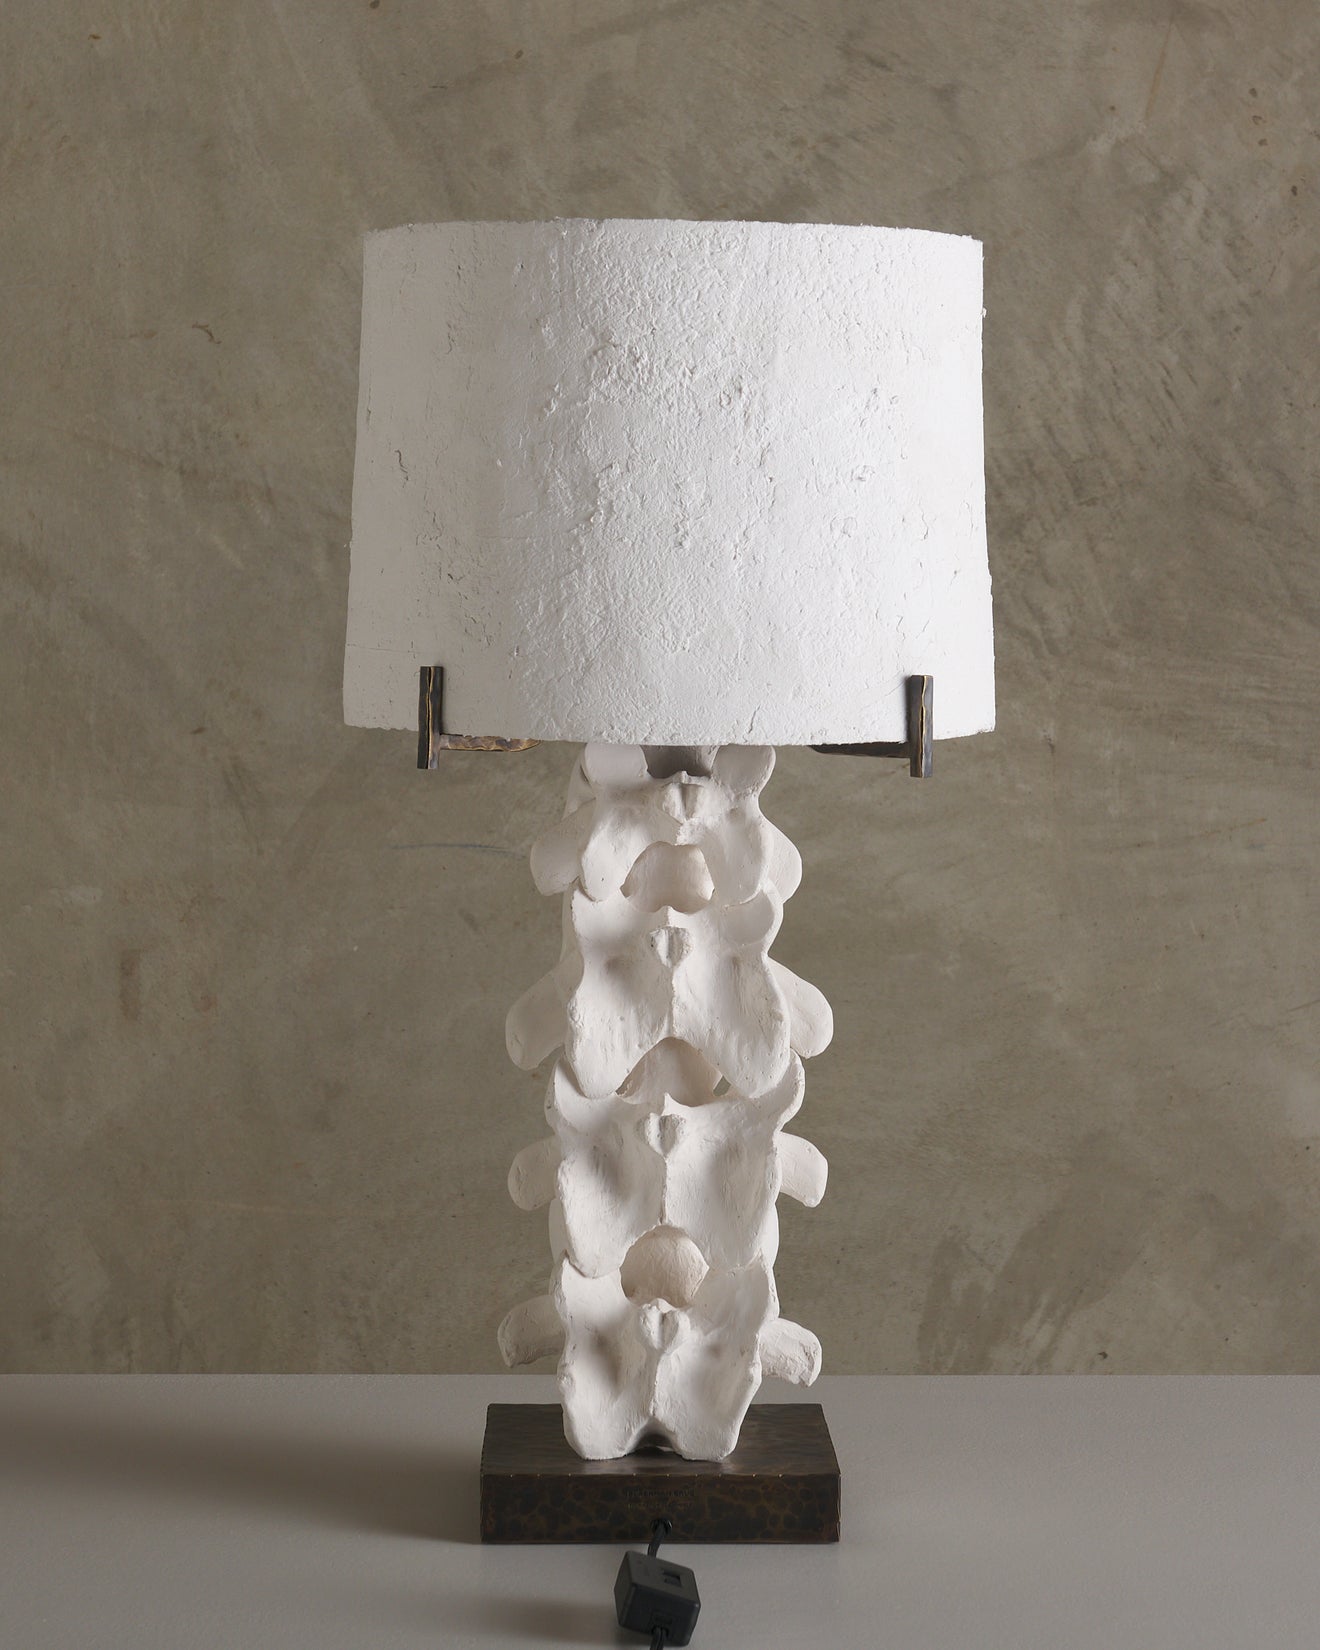 BCW VERTEBRAE TABLE LAMP FROM THE PRIMAL COLLECTION